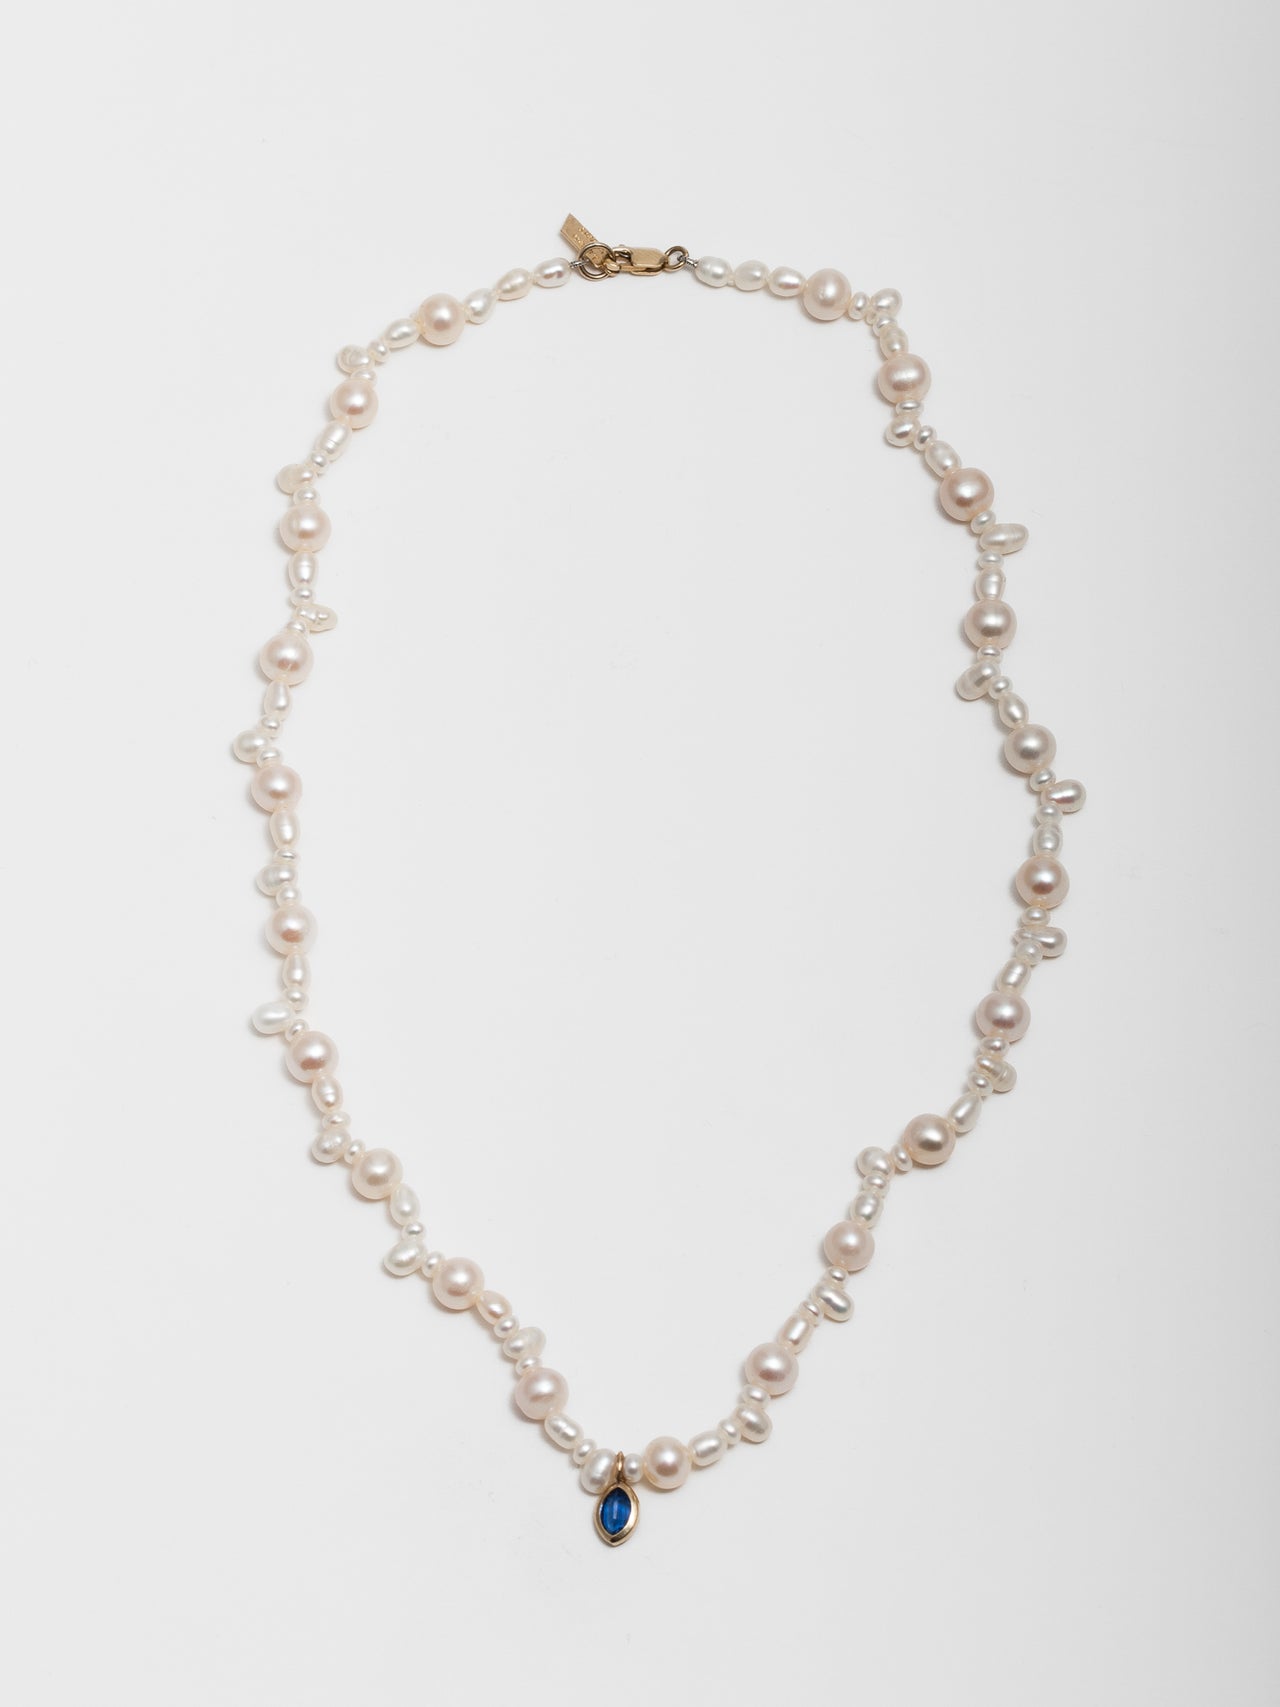 14kt Yellow Gold Pearl & Gemstone Necklace pictured on light grey background.